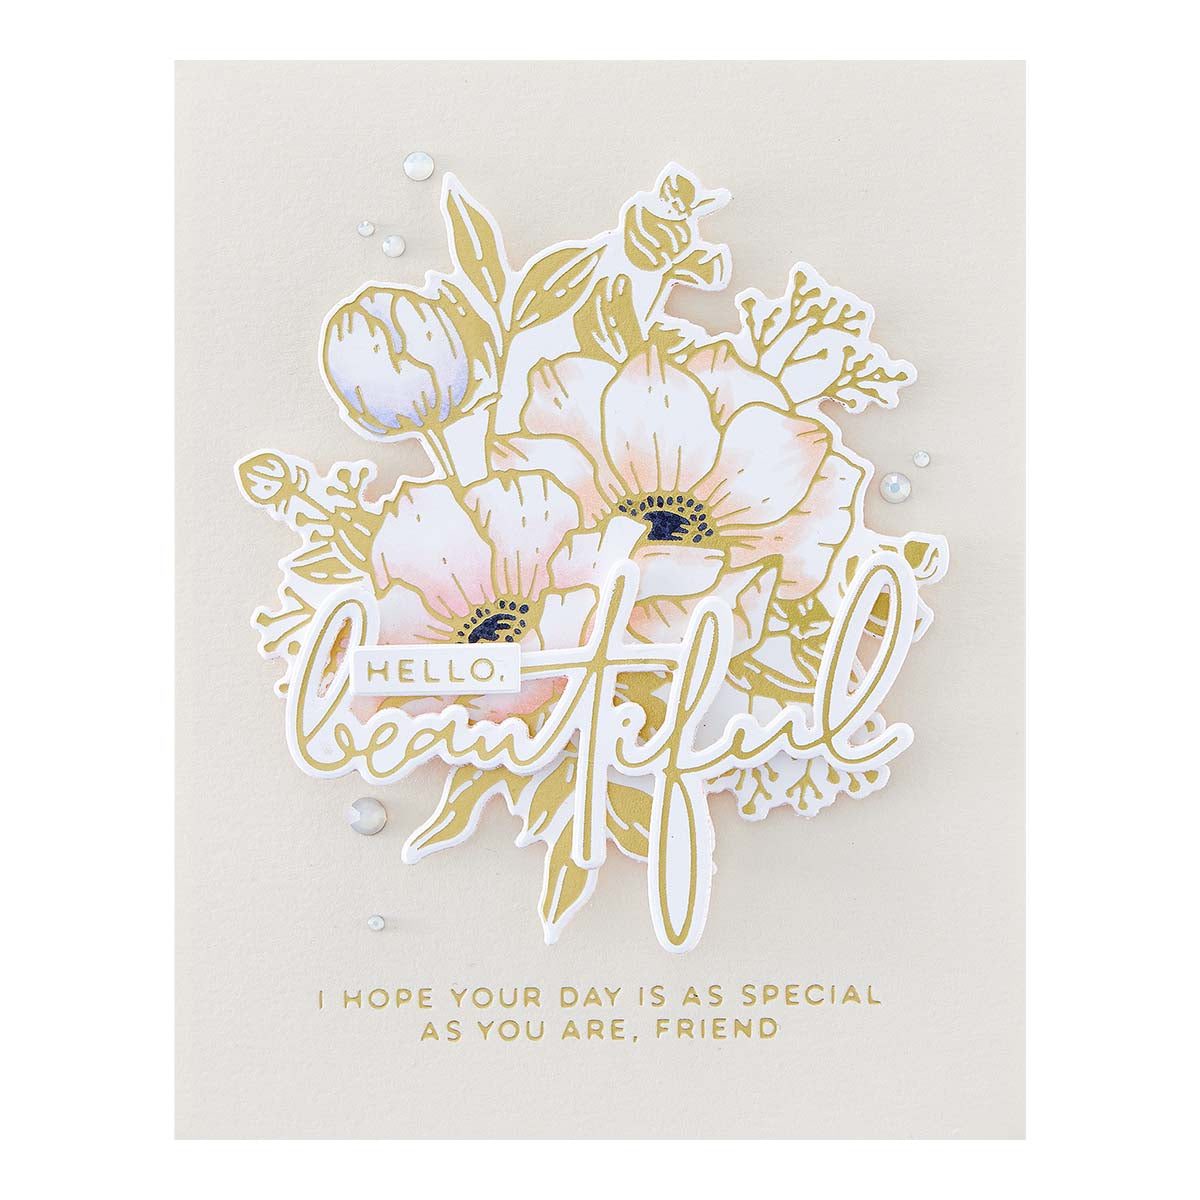 Spellbinders - Inside Card Glimmer Sentiments Glimmer Hot Foil Plate from Anemone Blooms Collection by Yana Smakula